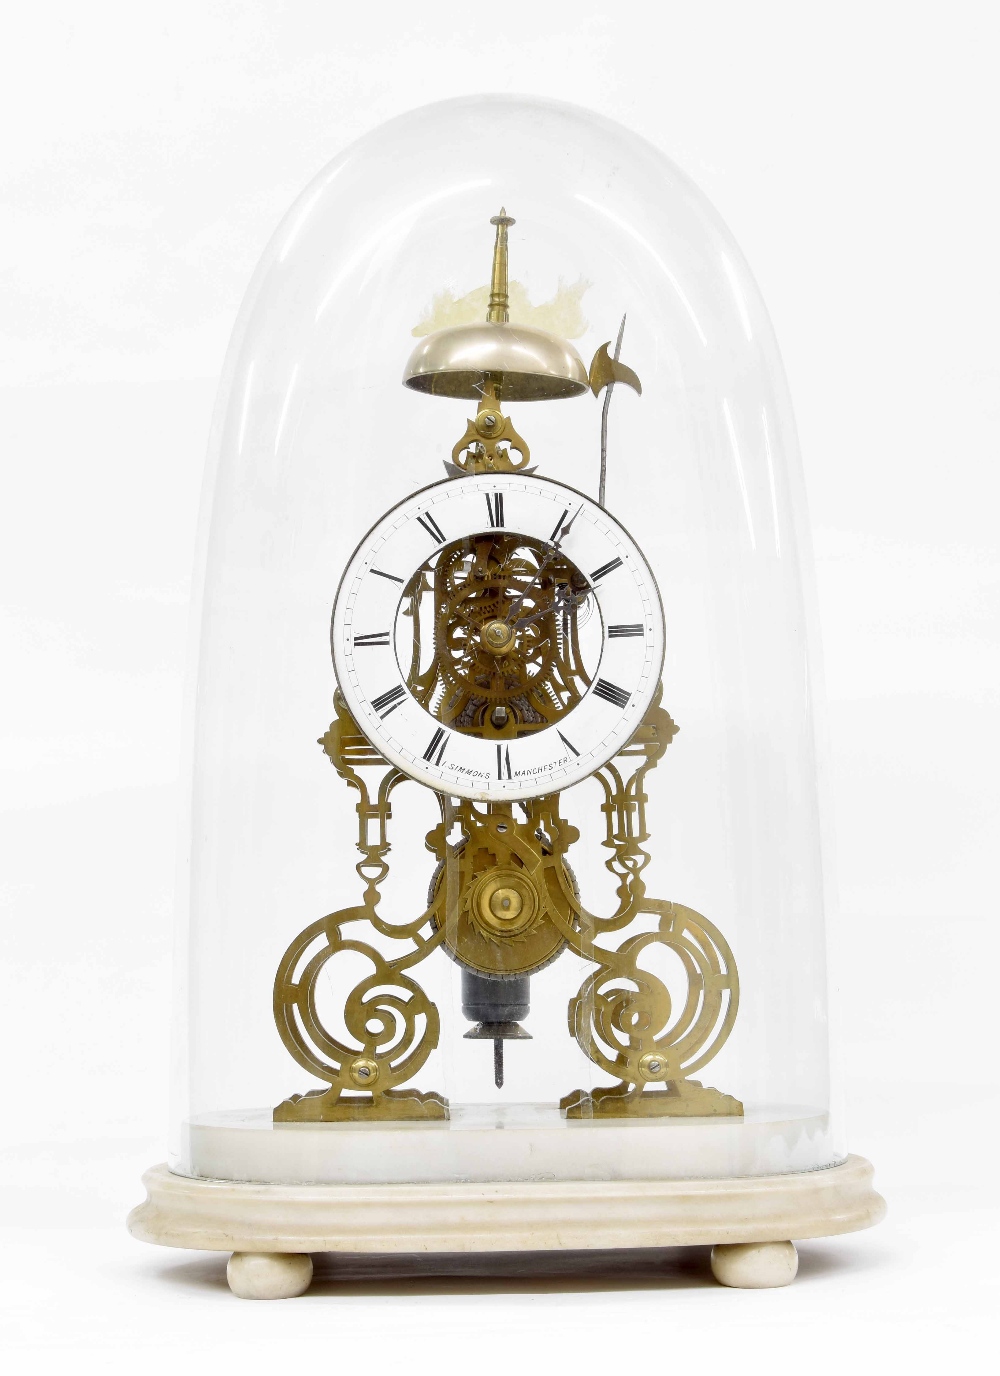 Good skeleton timepiece with passing strike, English, attributed to William Frederick Evans,